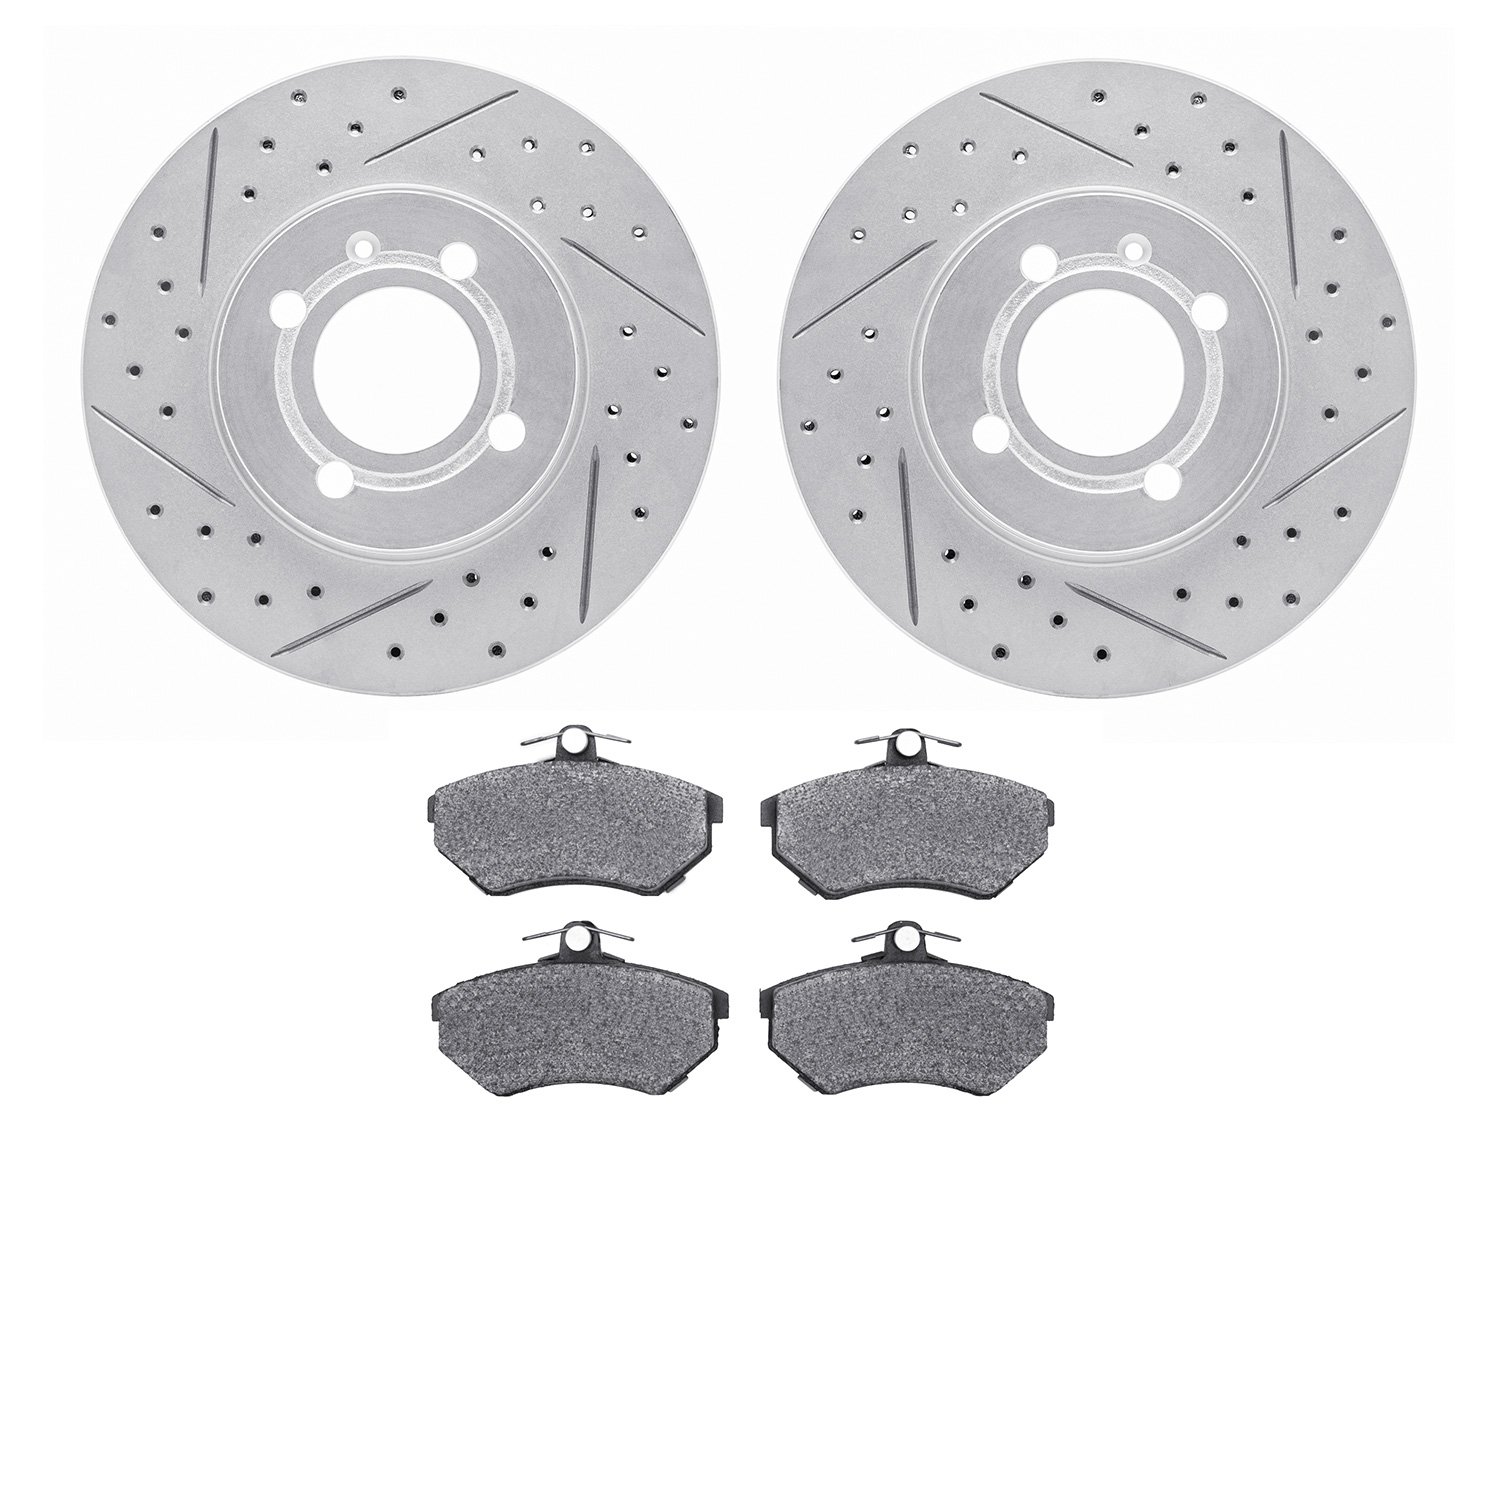 2502-74005 Geoperformance Drilled/Slotted Rotors w/5000 Advanced Brake Pads Kit, 1993-1993 Audi/Volkswagen, Position: Front